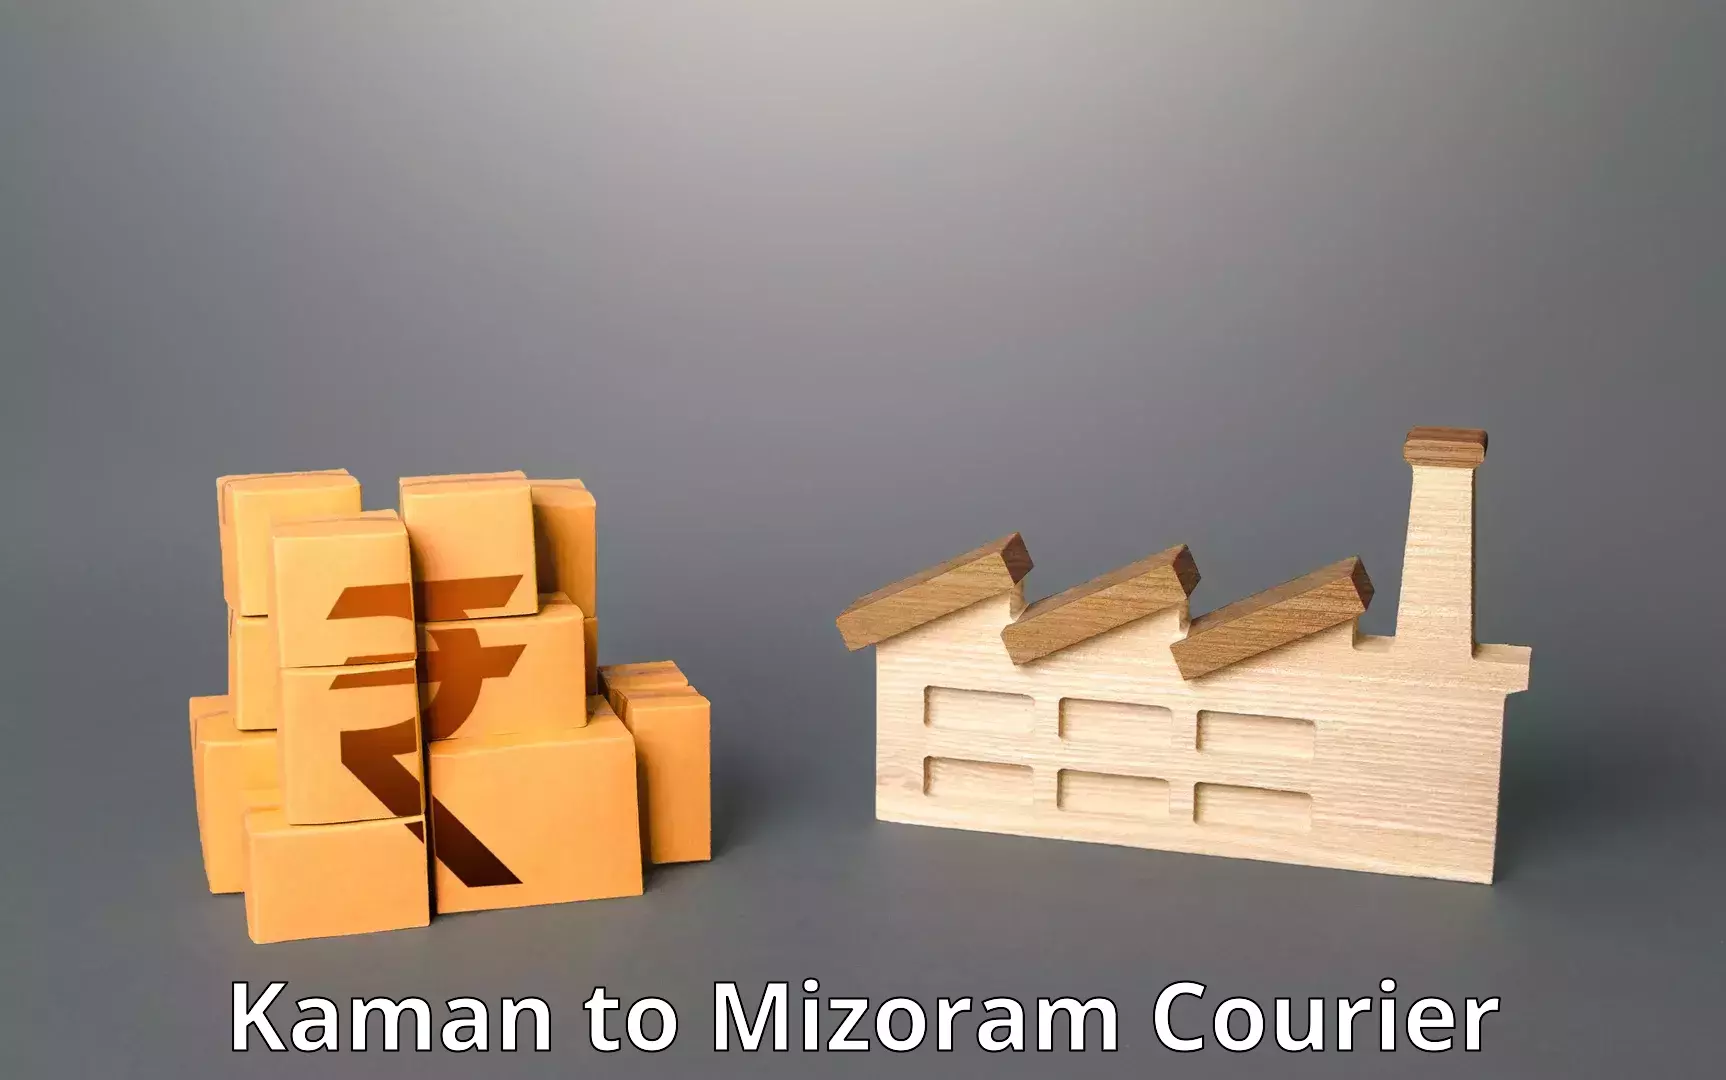 Express delivery network Kaman to Mizoram